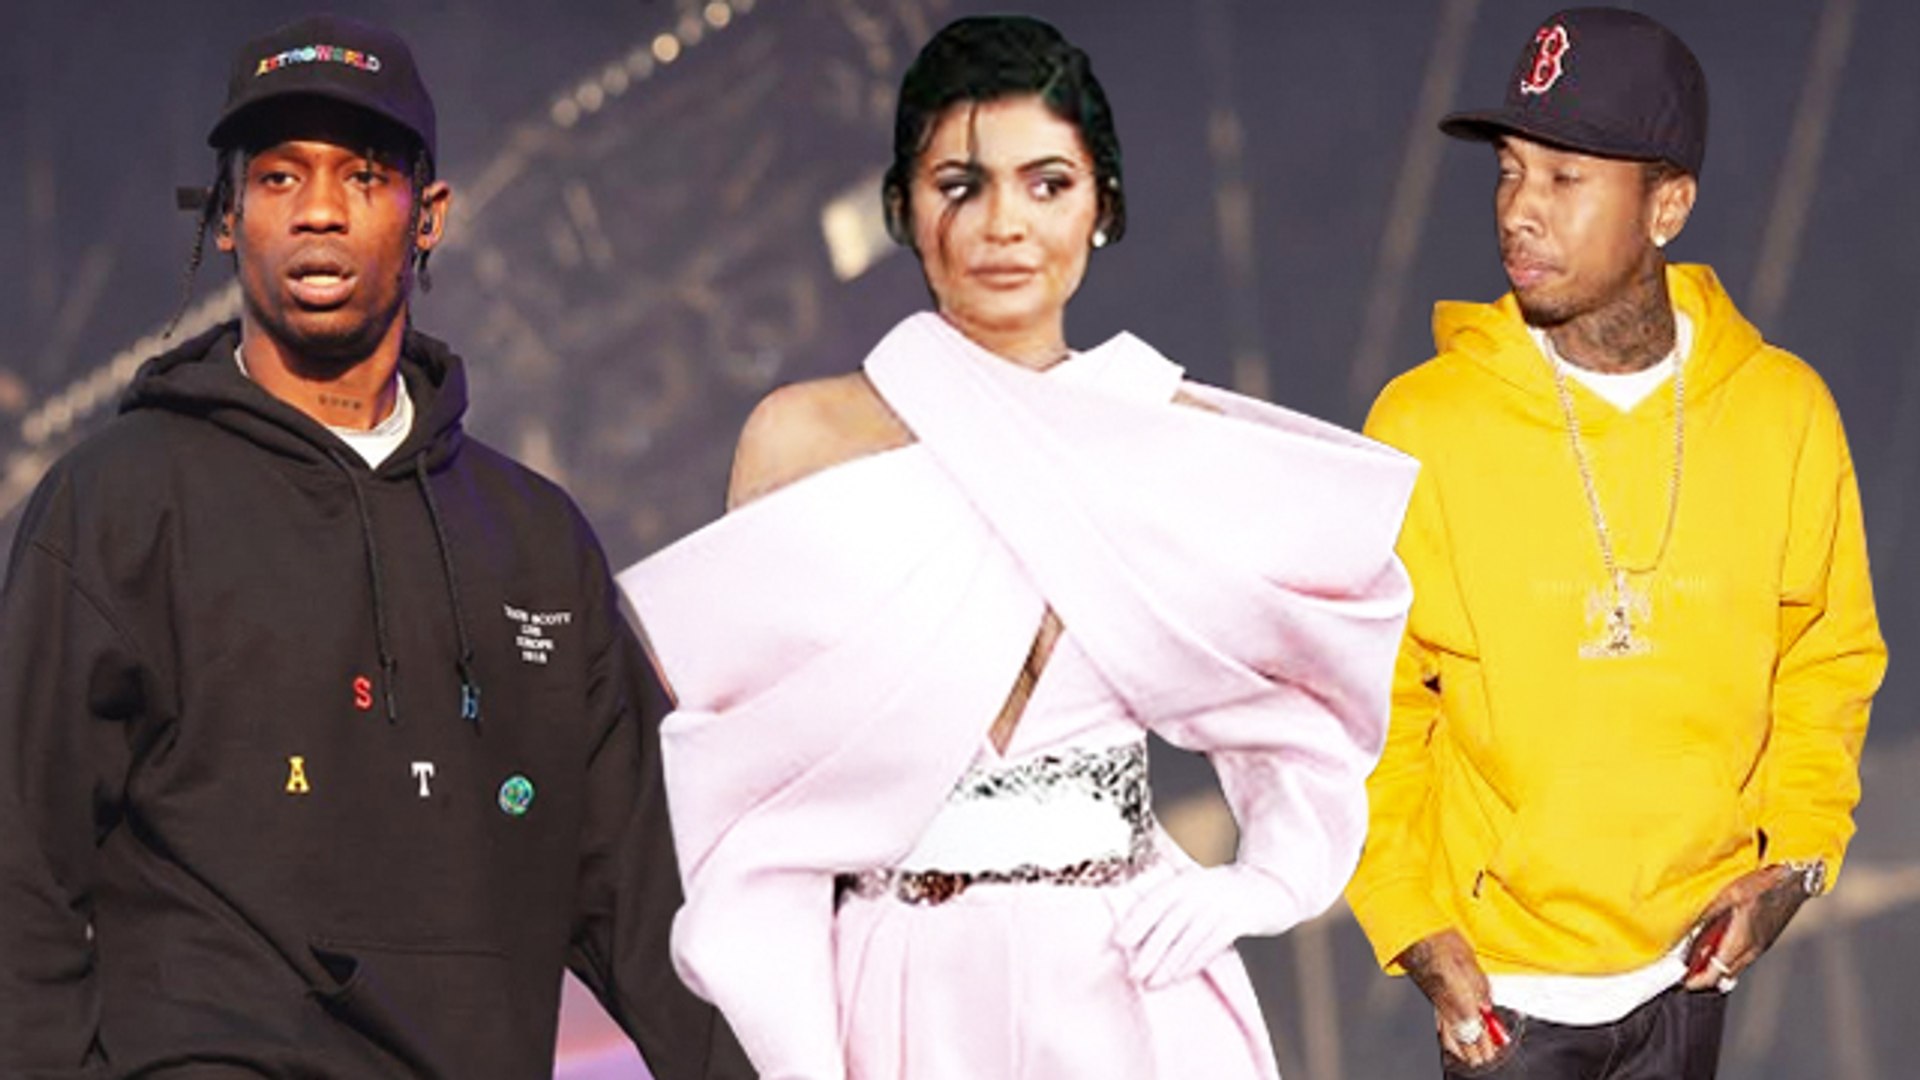 Kylie Jenner Partied With Both Her Exes Travis Scott & Tyga At Diddy’s 50th Birthday Party